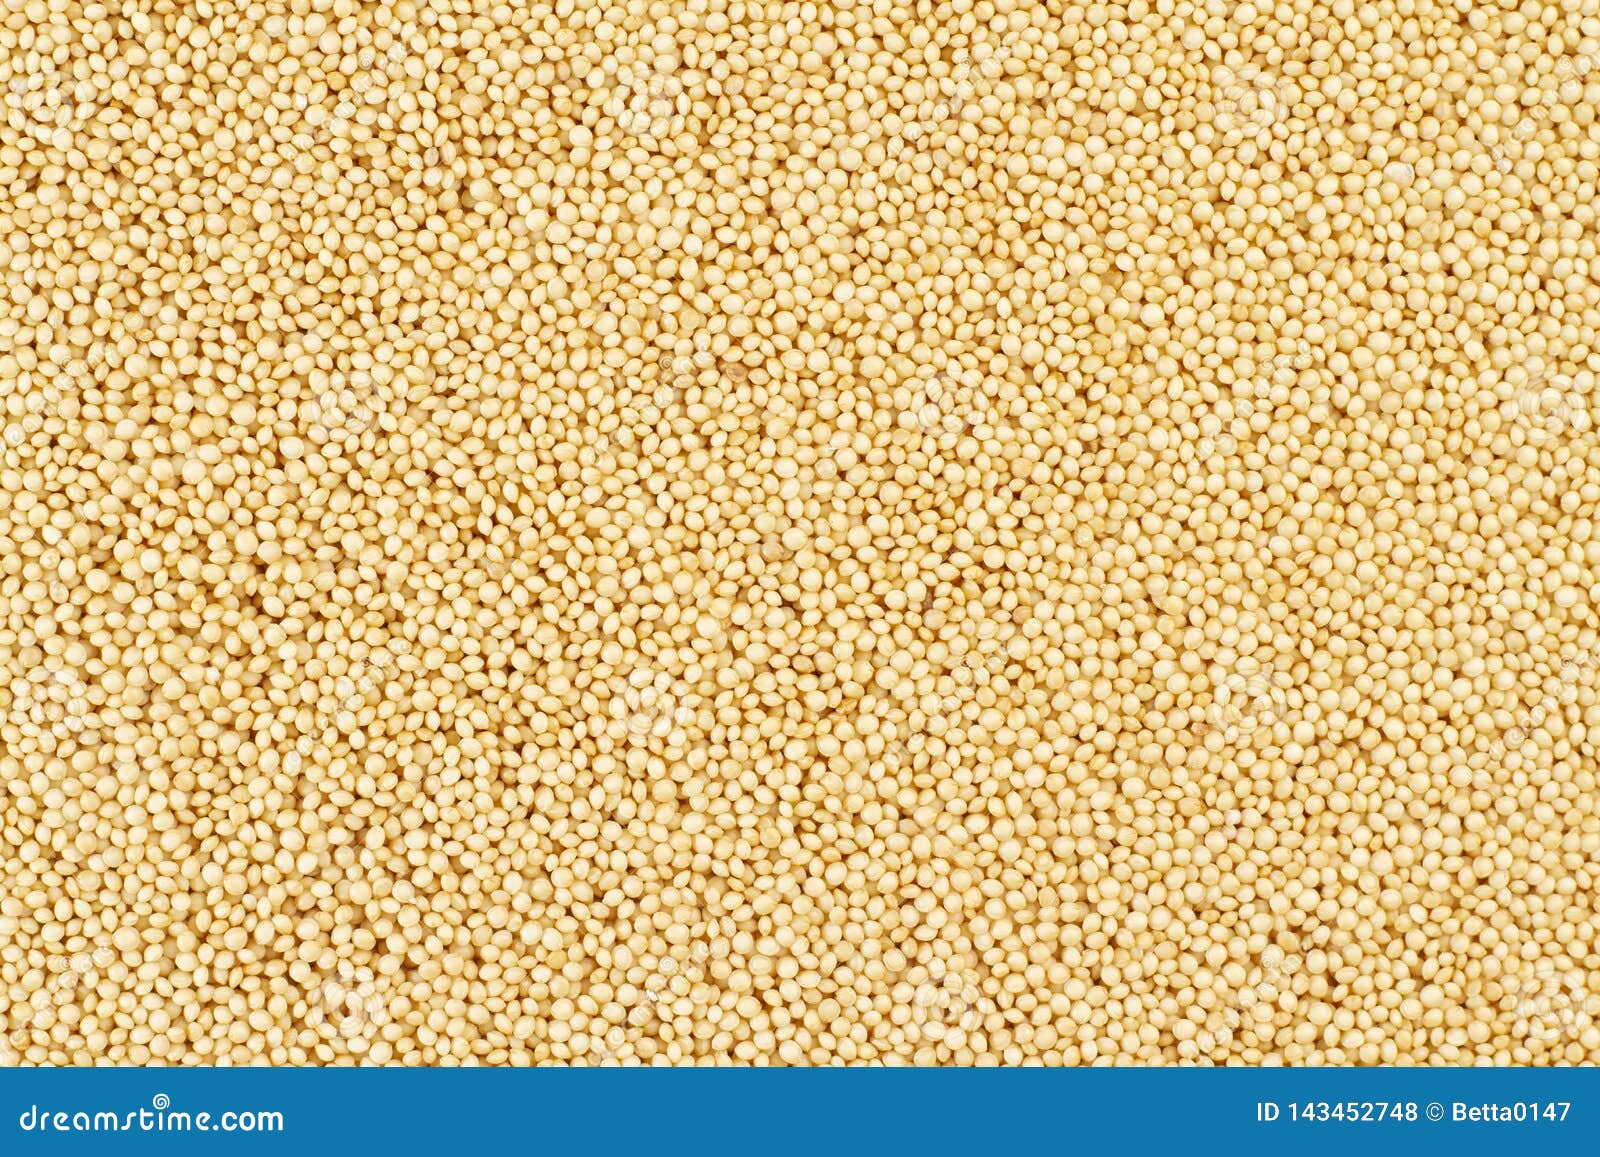 Amaranth beans background stock photo. Image of nutritious - 143452748